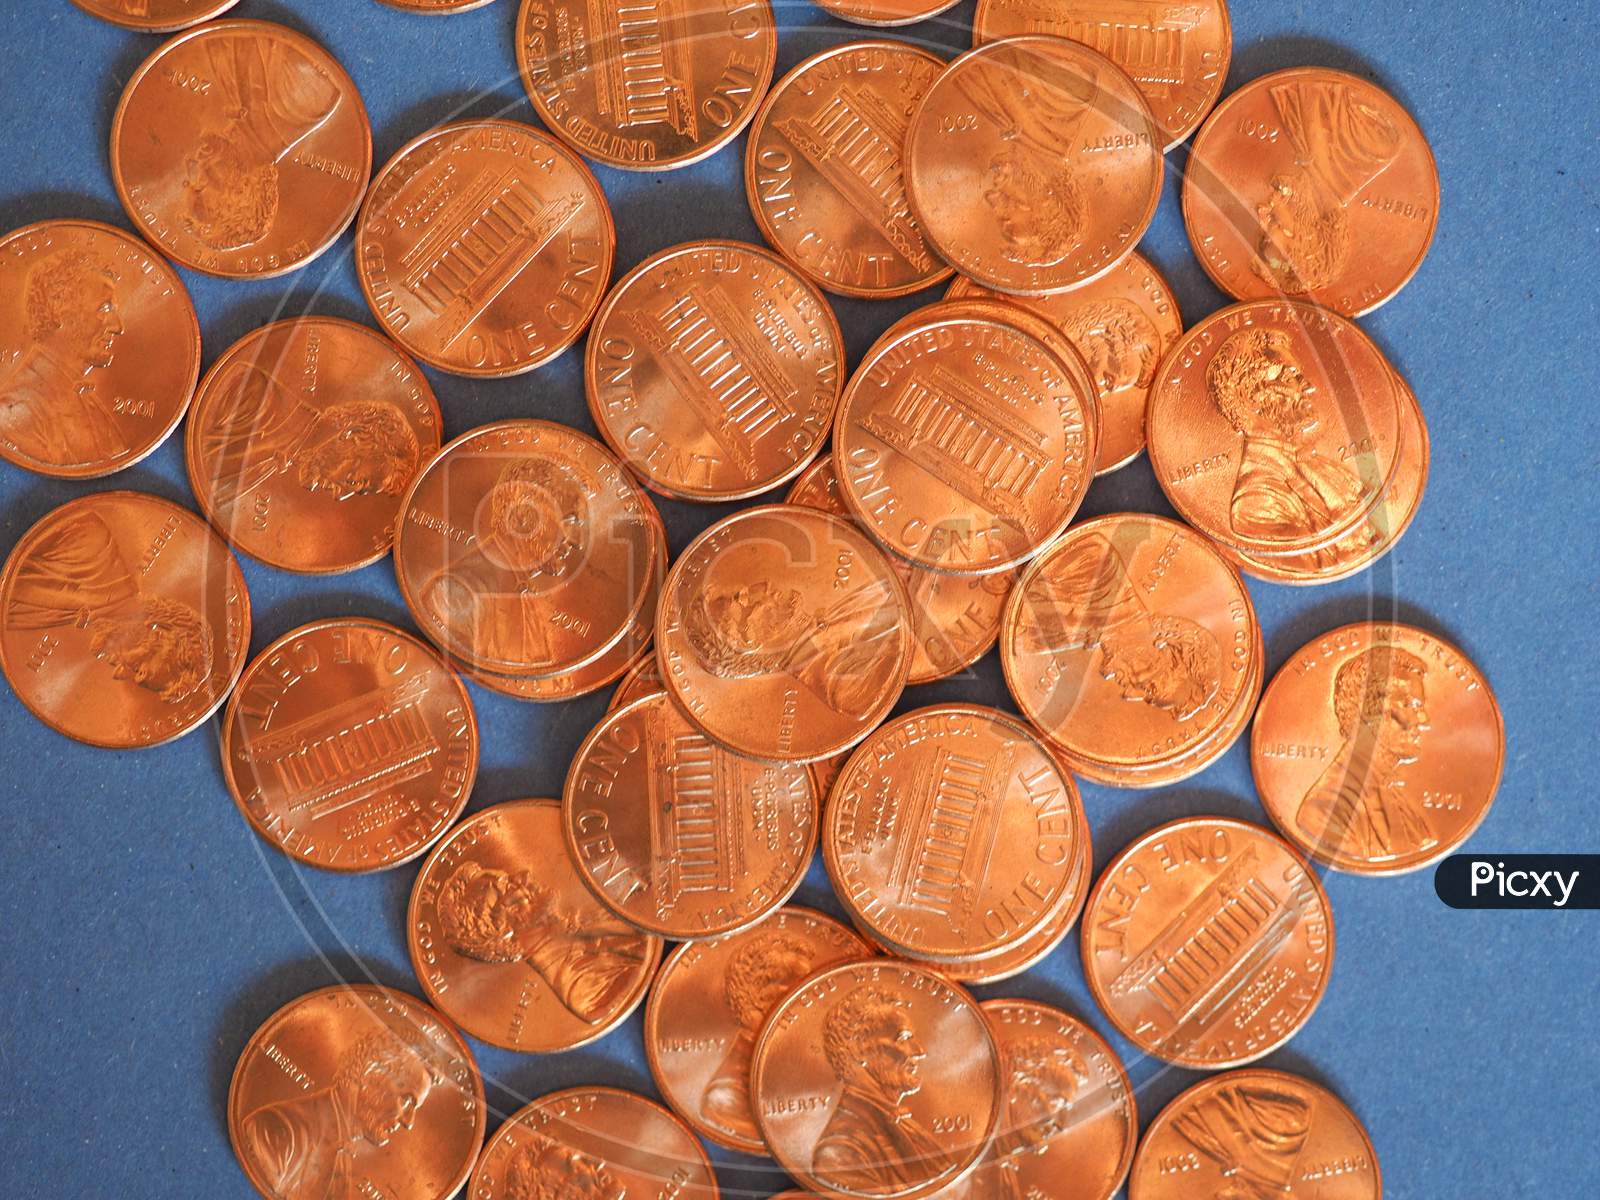 One Cent Dollar Coins, United States Over Blue